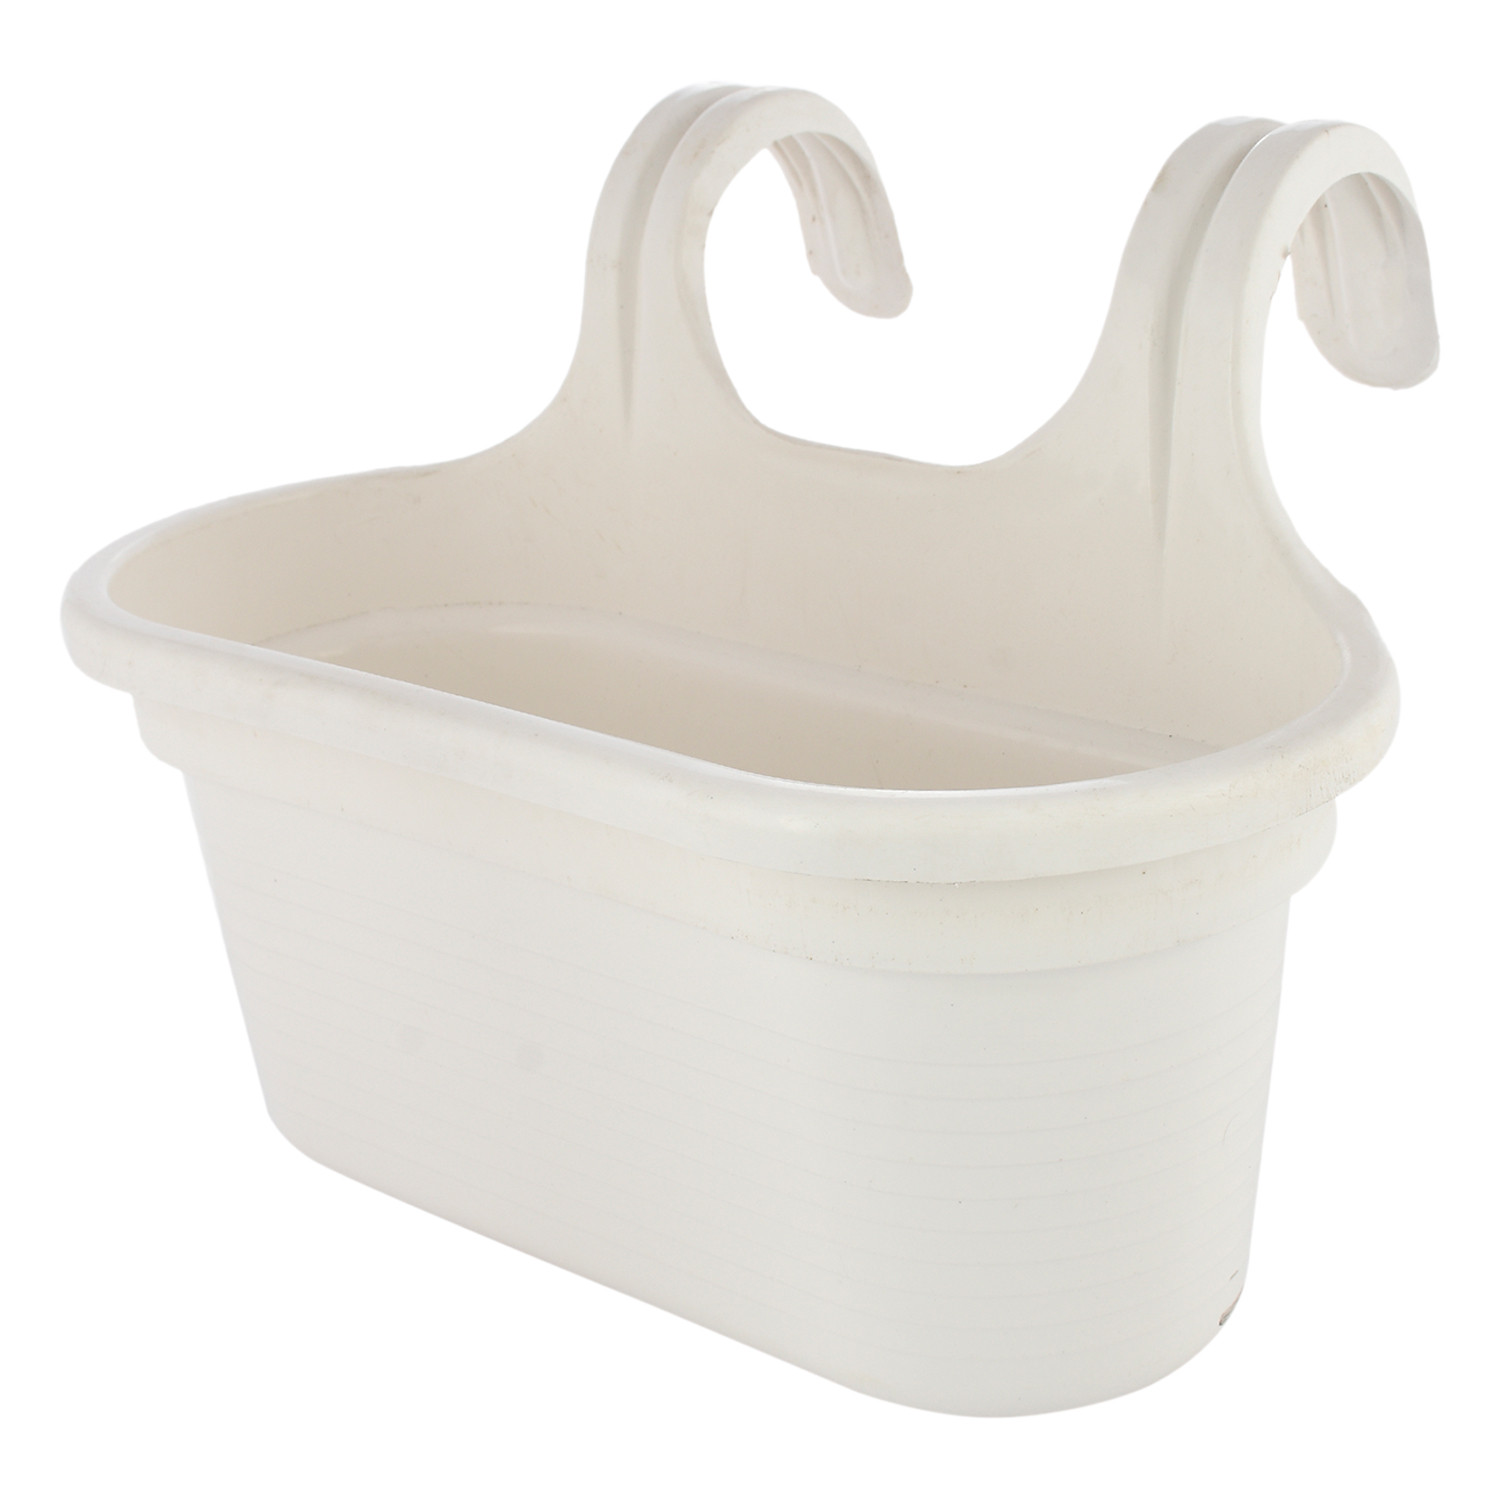 Kuber Industries Hanging Flower Pot|Double Hook Plant Container|Durable Plastic Glossy Finish Pots for Home|Balcony|Garden|12 Inch (White)